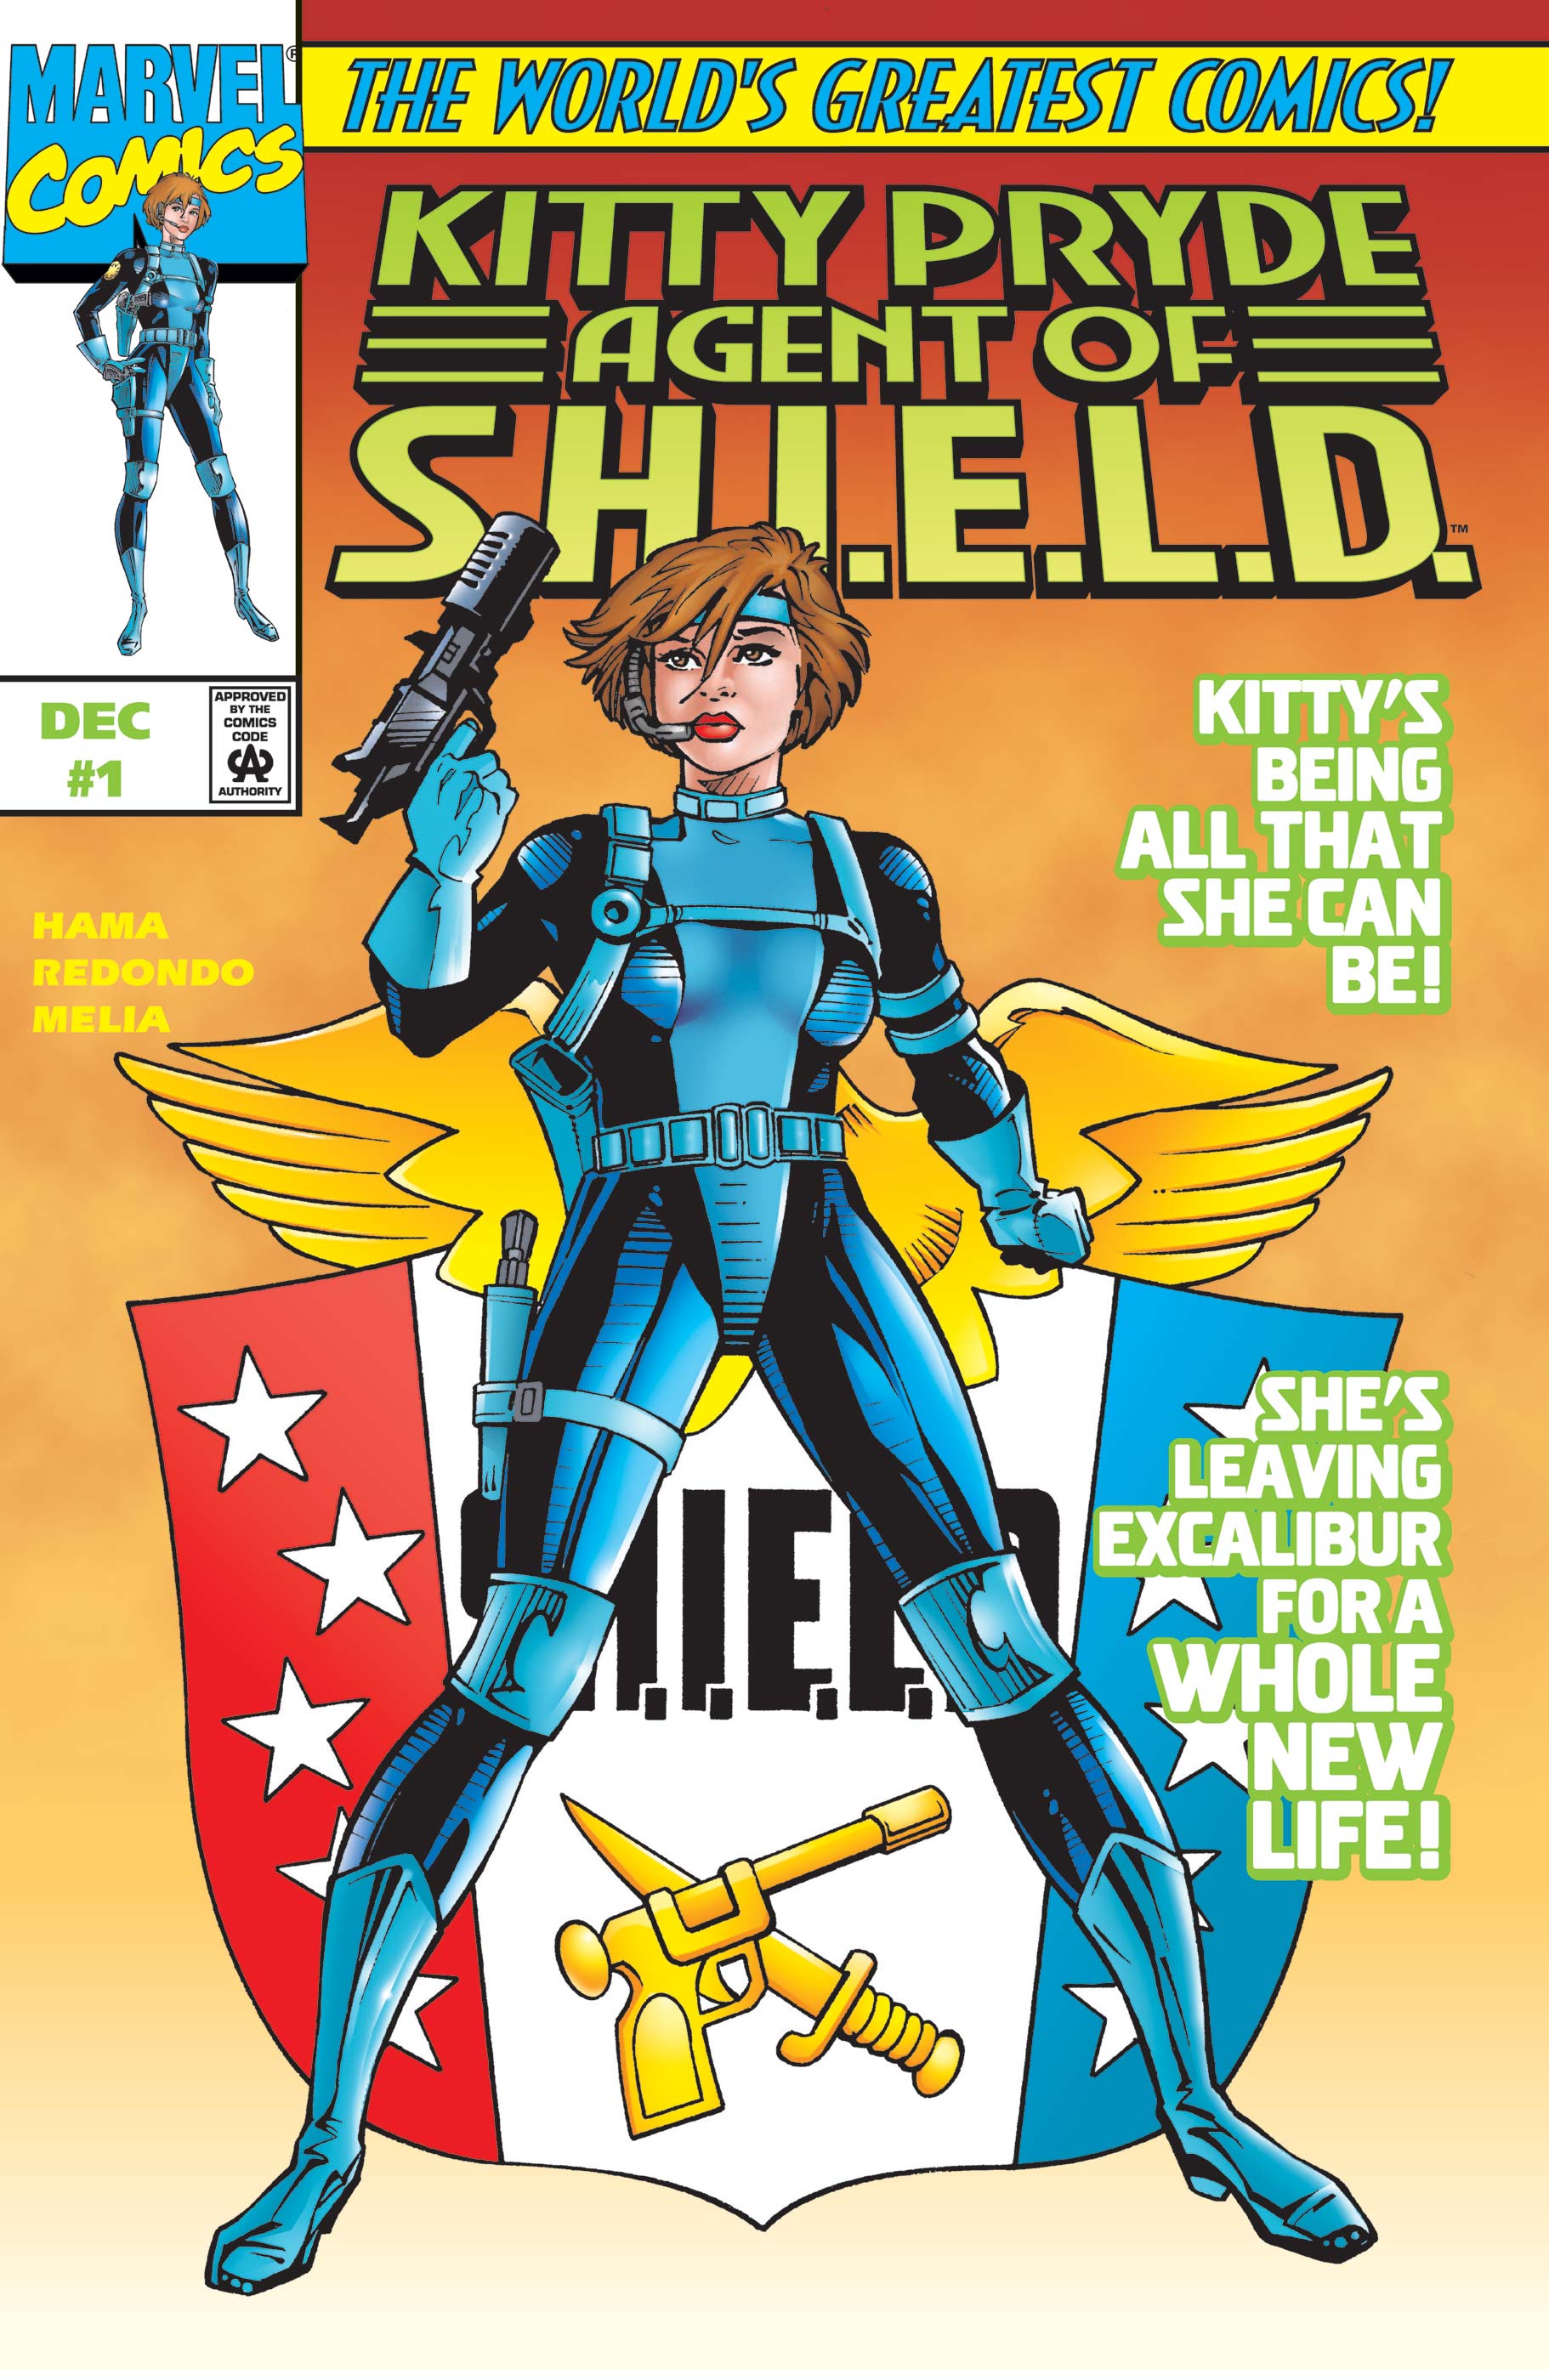 Kitty Pryde, Agent of S.H.I.E.L.D. (1997) #1